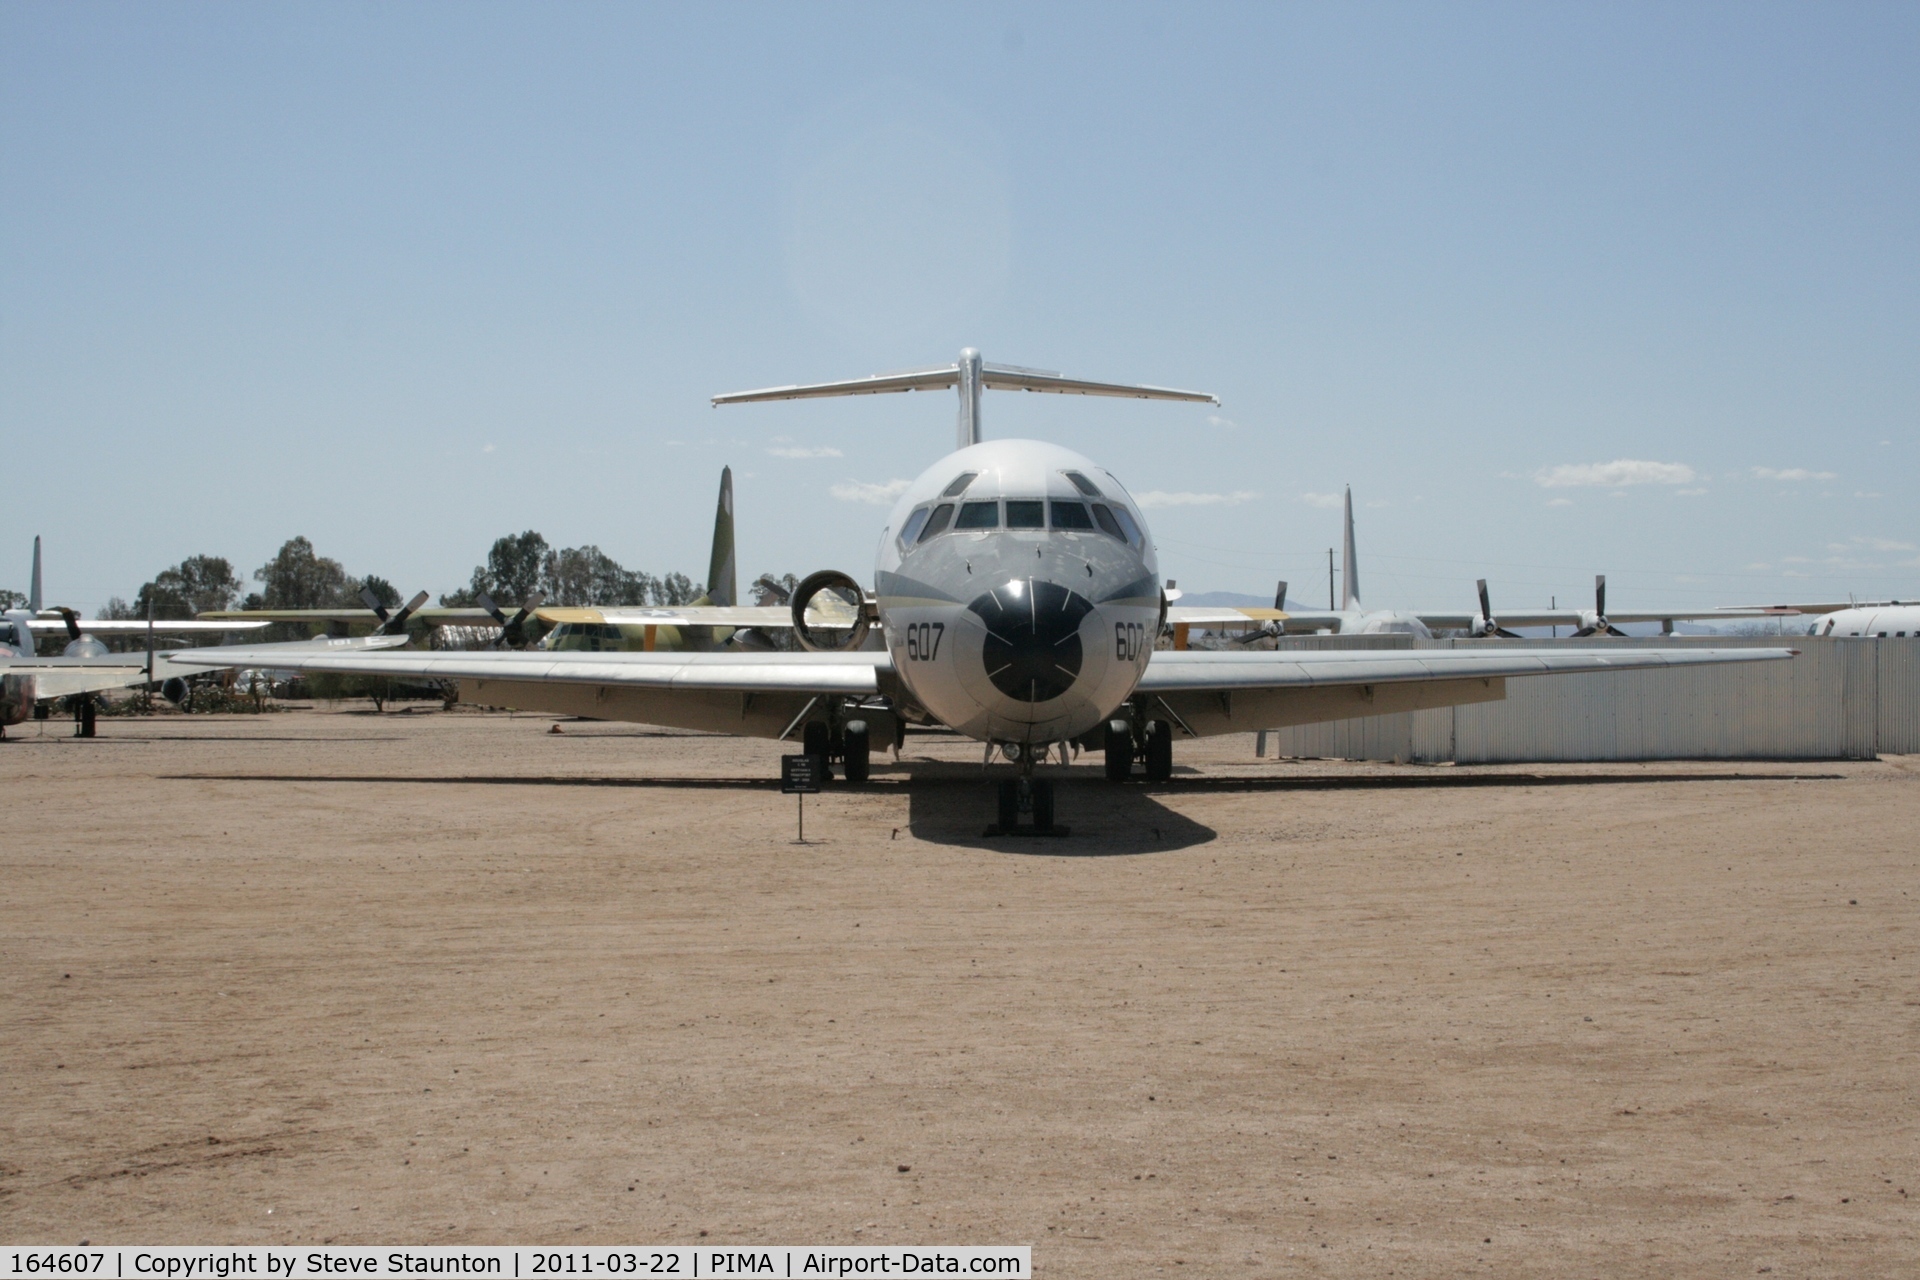 164607, 1972 McDonnell Douglas C-9B Skytrain II C/N 47428, Taken at Pima Air and Space Museum, in March 2011 whilst on an Aeroprint Aviation tour